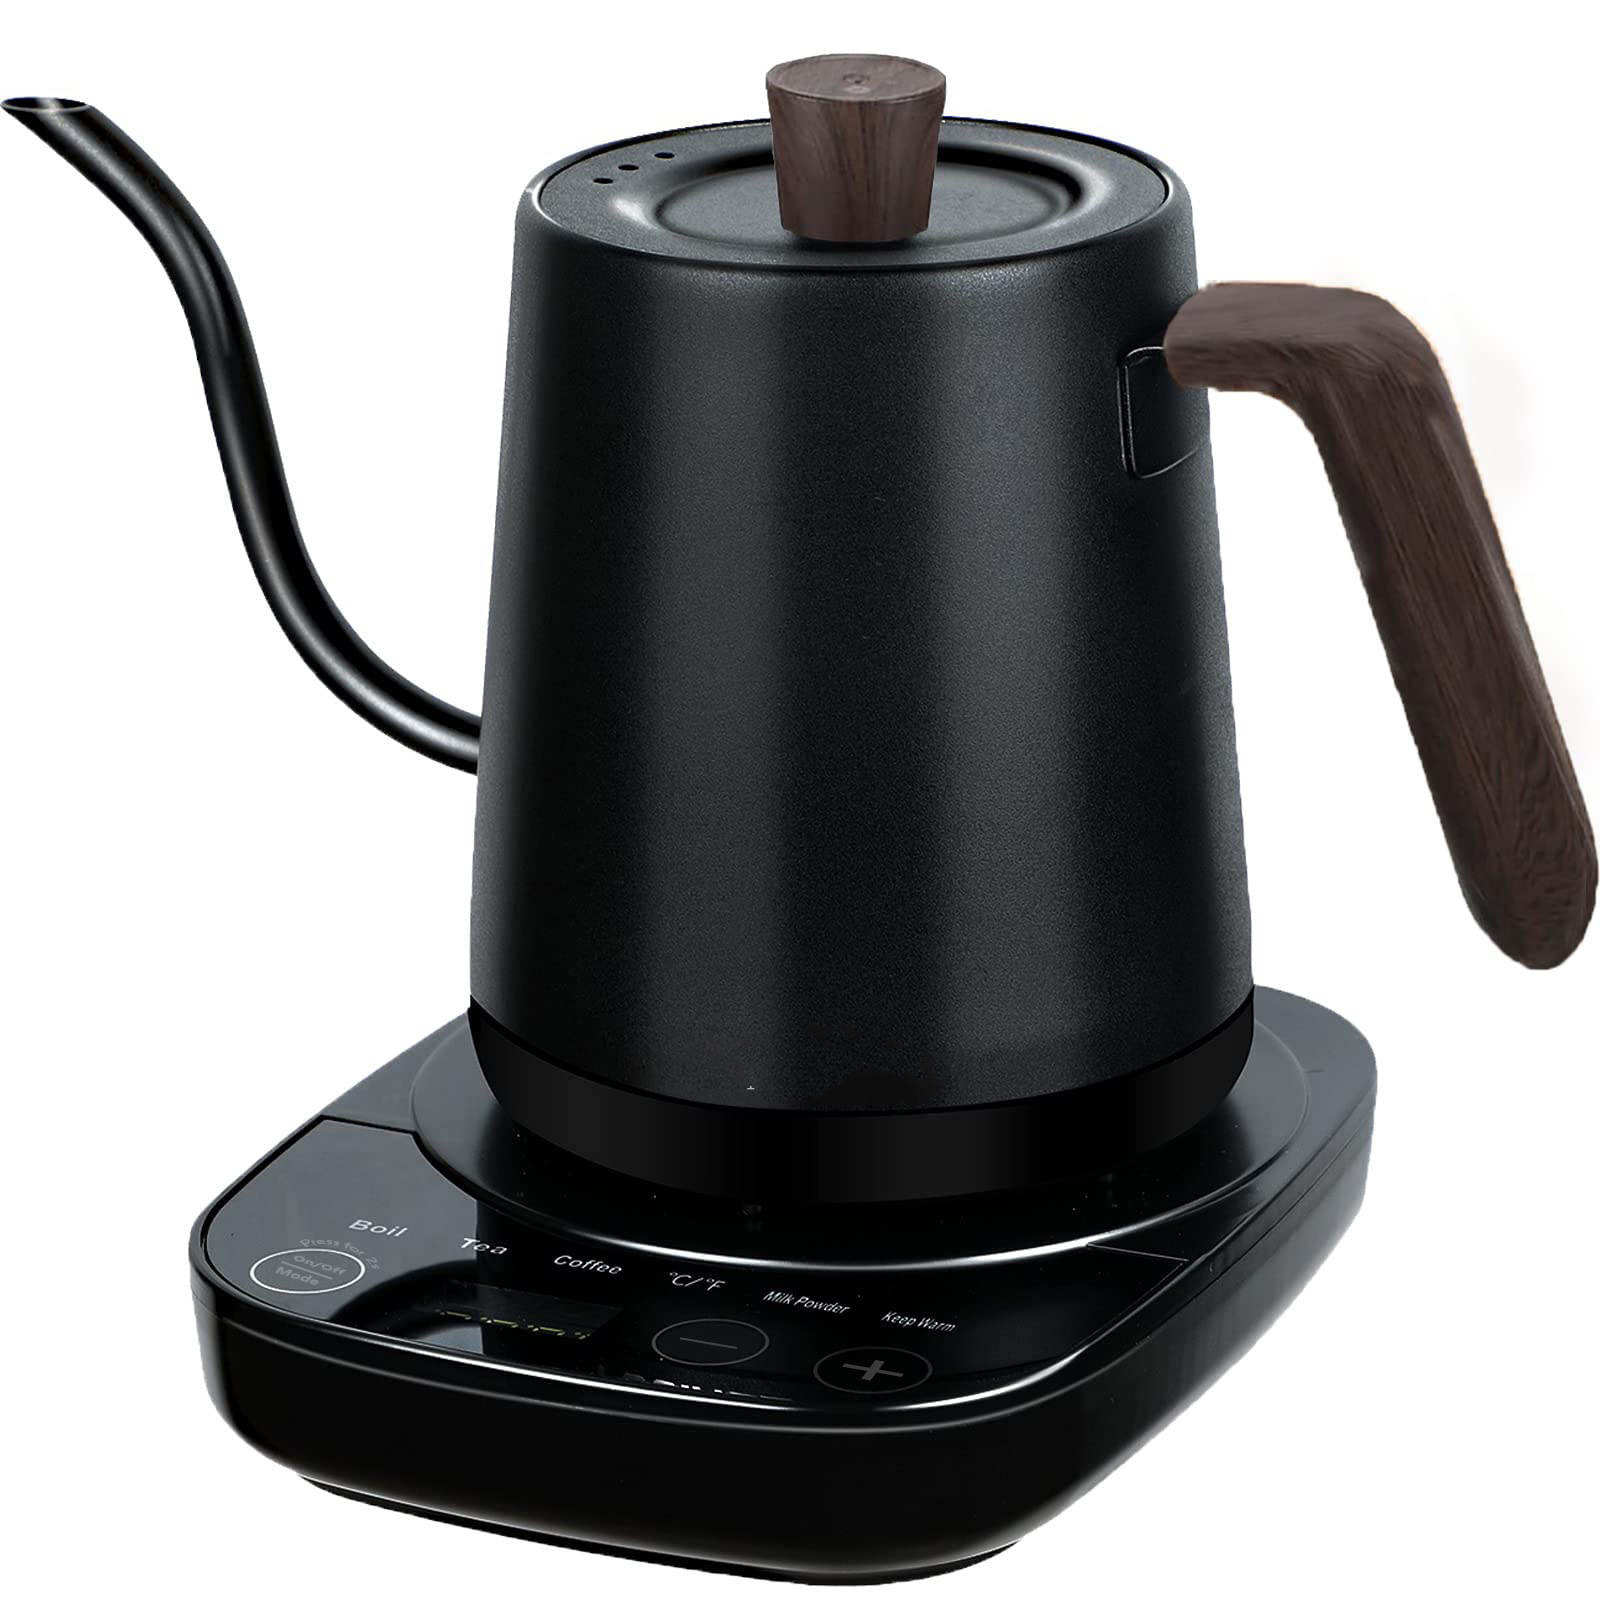 COMFEE' Gooseneck Electric Kettle with Temperature Control, 3